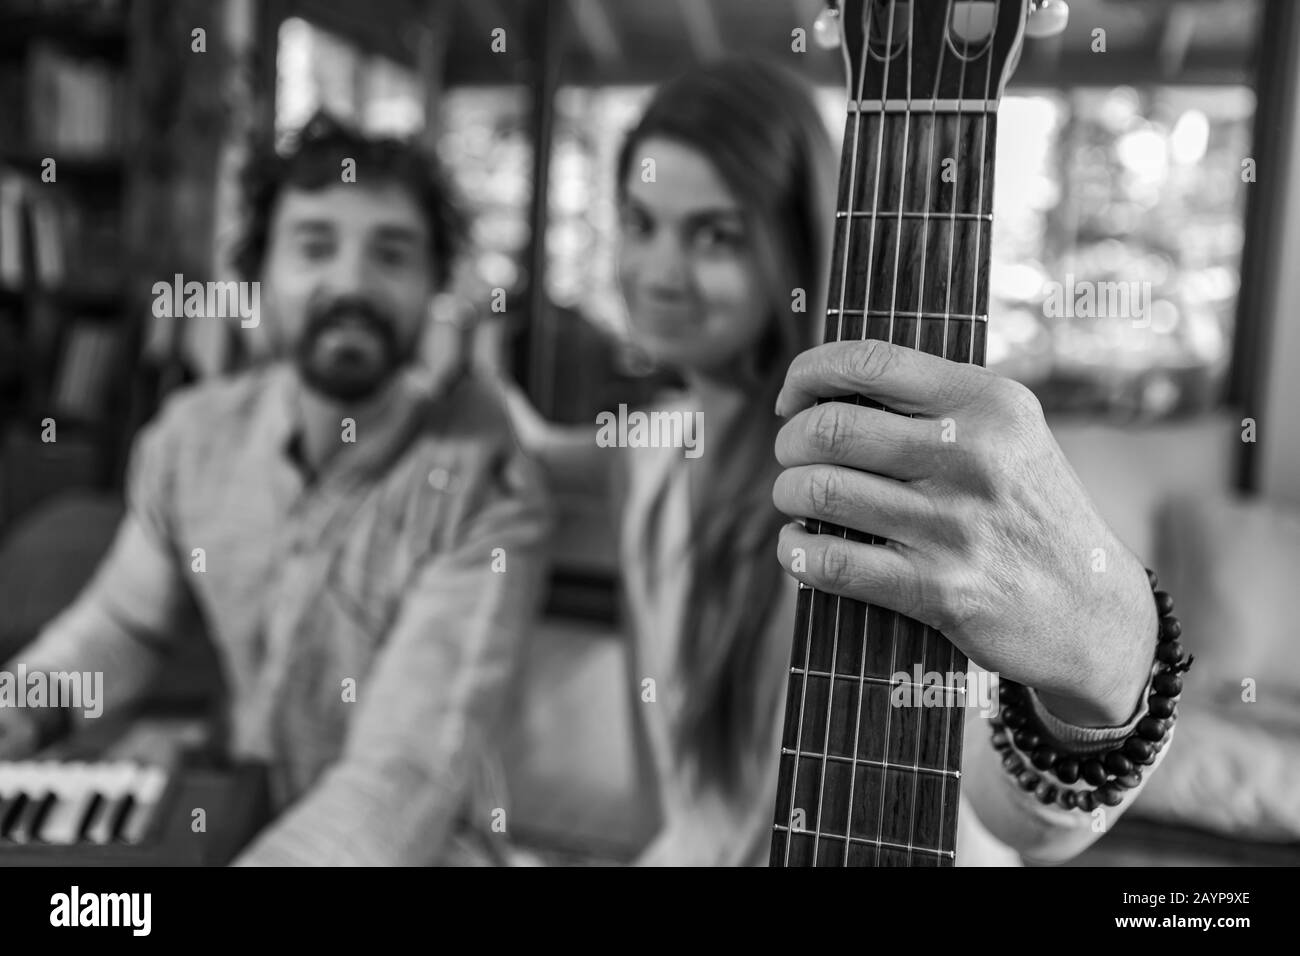 Black and white man and woman holding classical guitar with nylon strings and man playing harmonium for sacred and kirtan music looking at camera Stock Photo